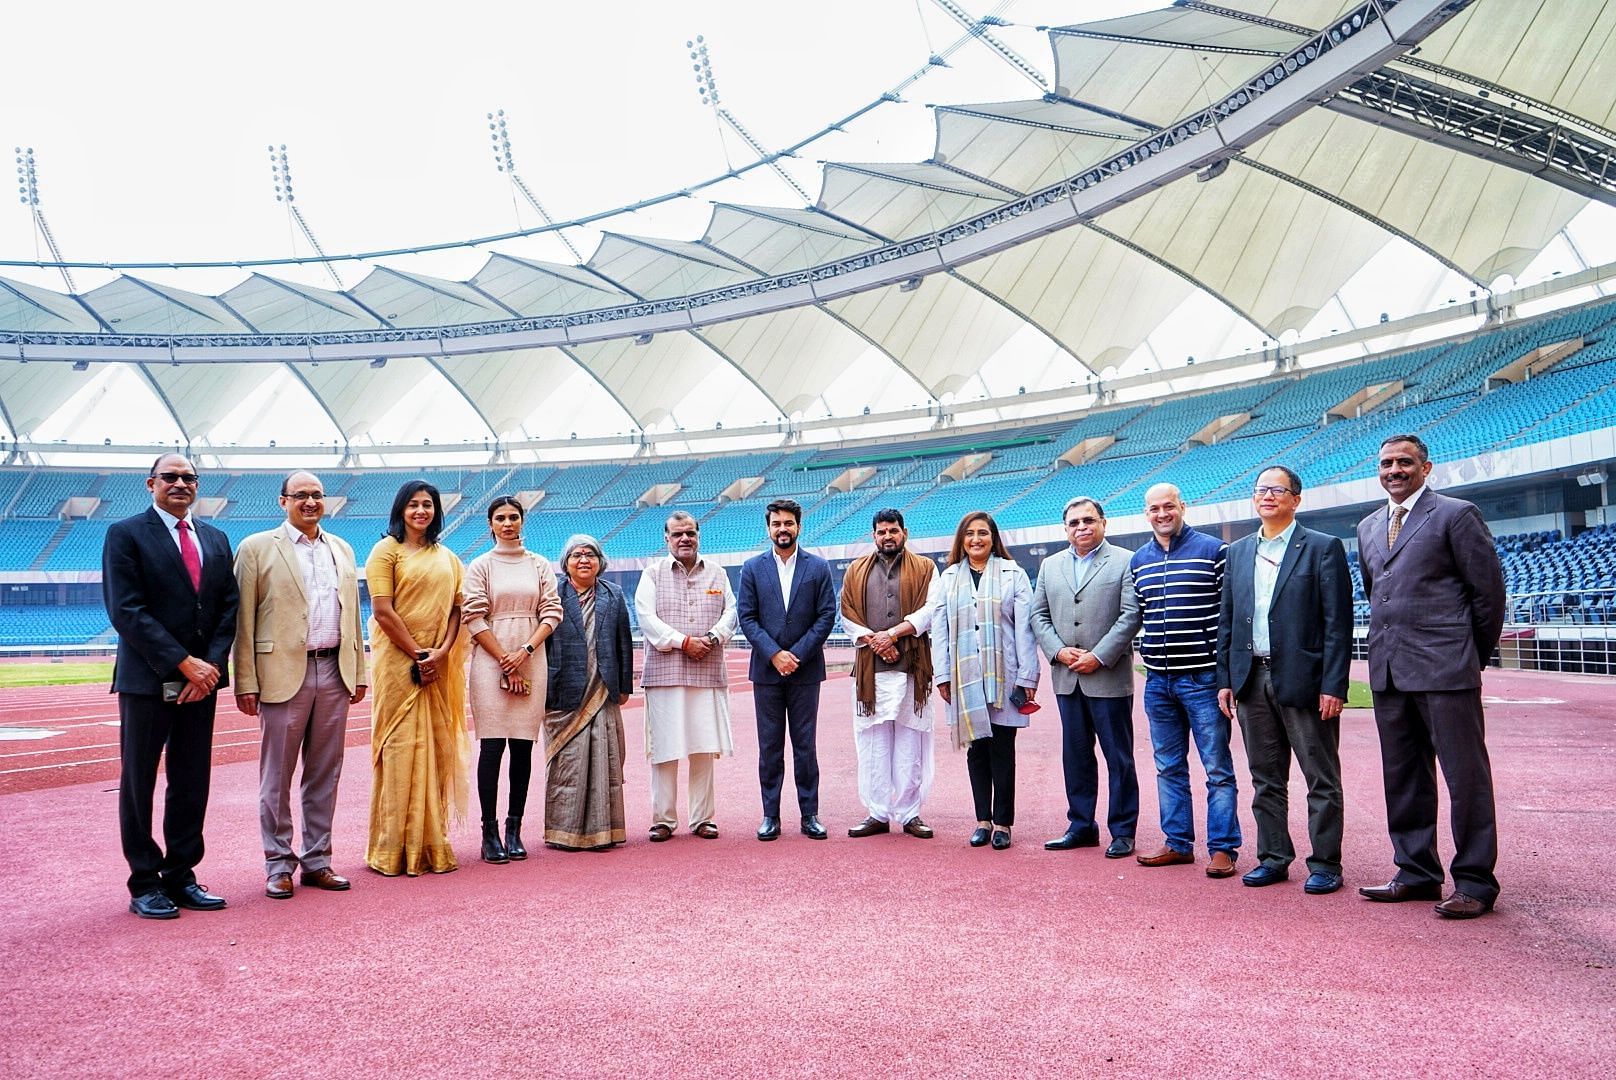 The members of the Mission Olympic Cell (MOC) after a meeting in New Delhi on Monday. (PC: SAI)